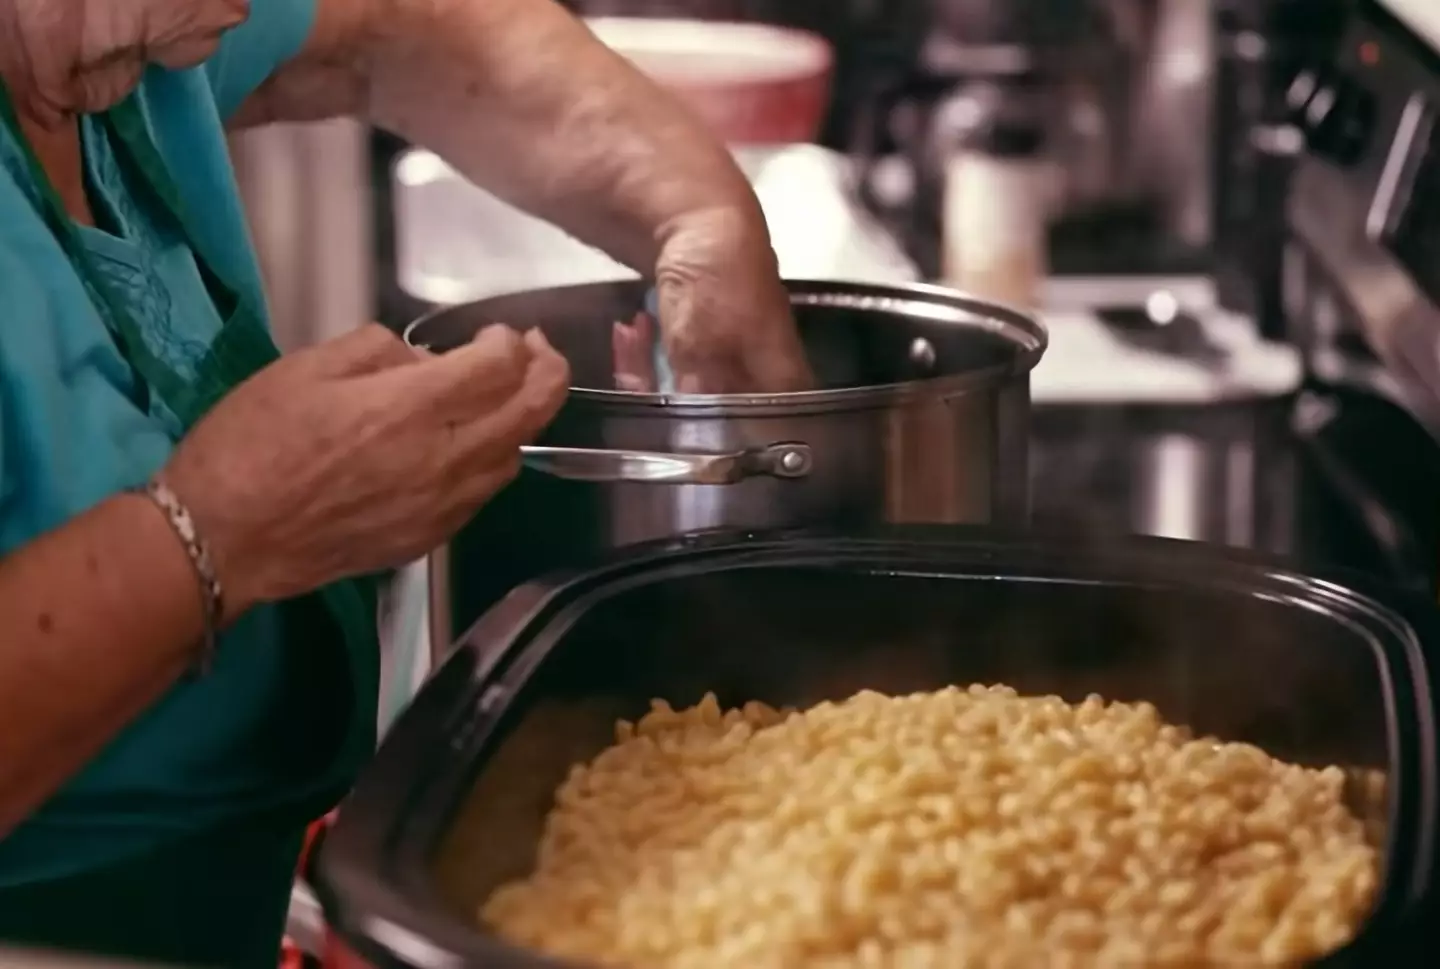 Norma makes meals for the homeless and those struggling to afford food.